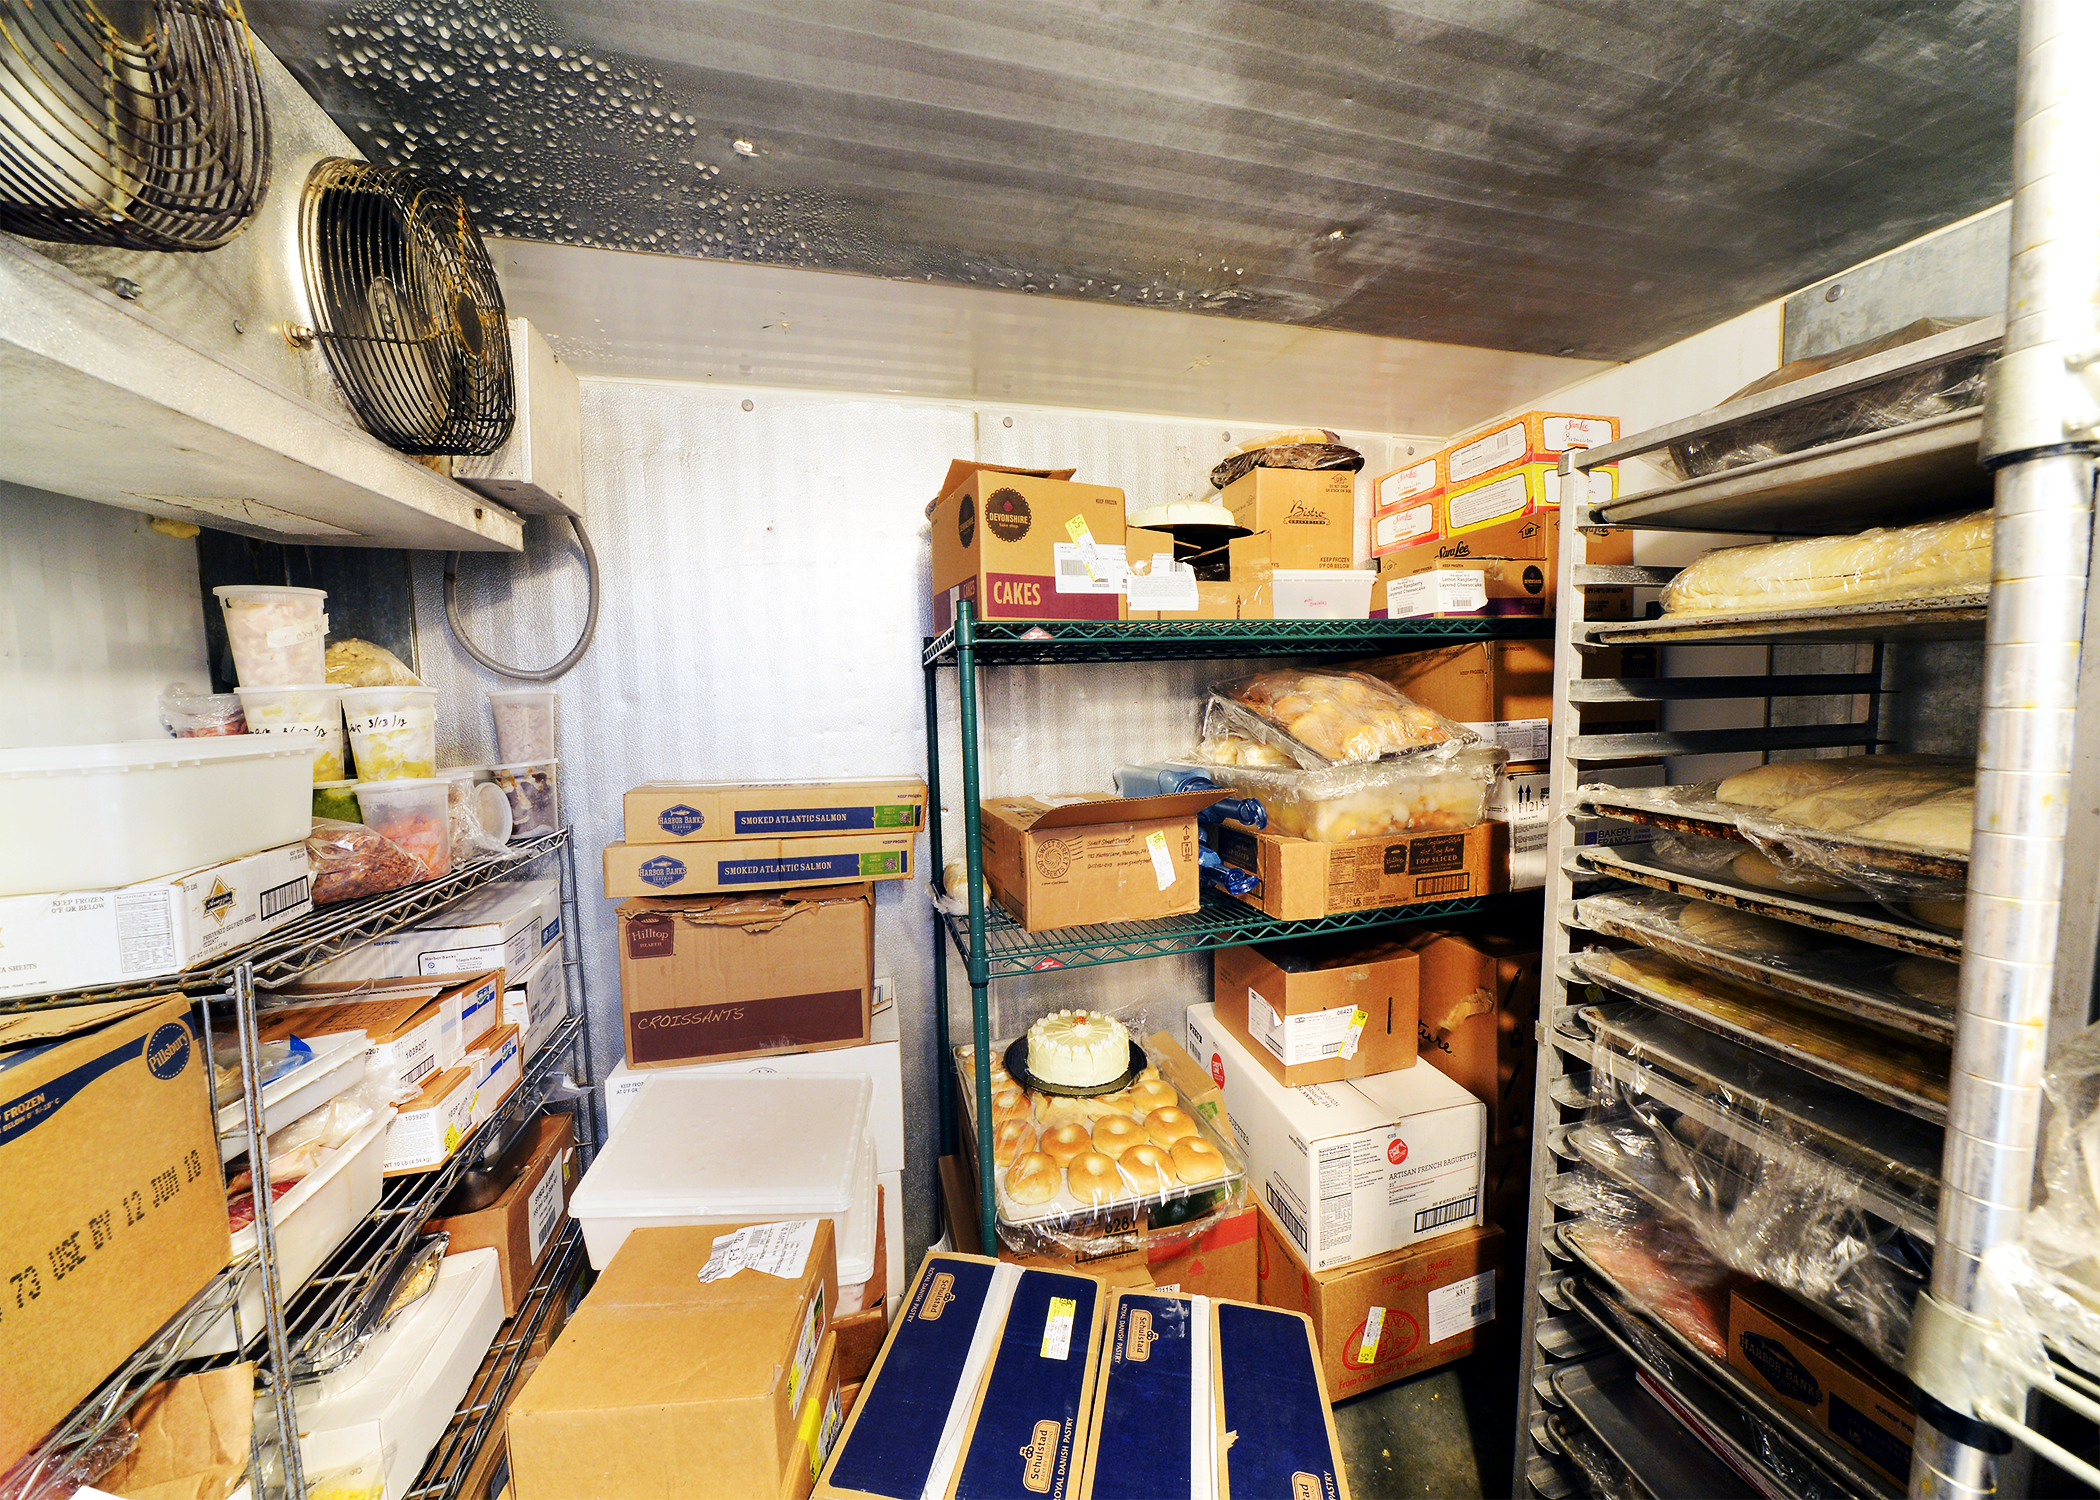 A pantry containing cardboard boxes and a drying rack.